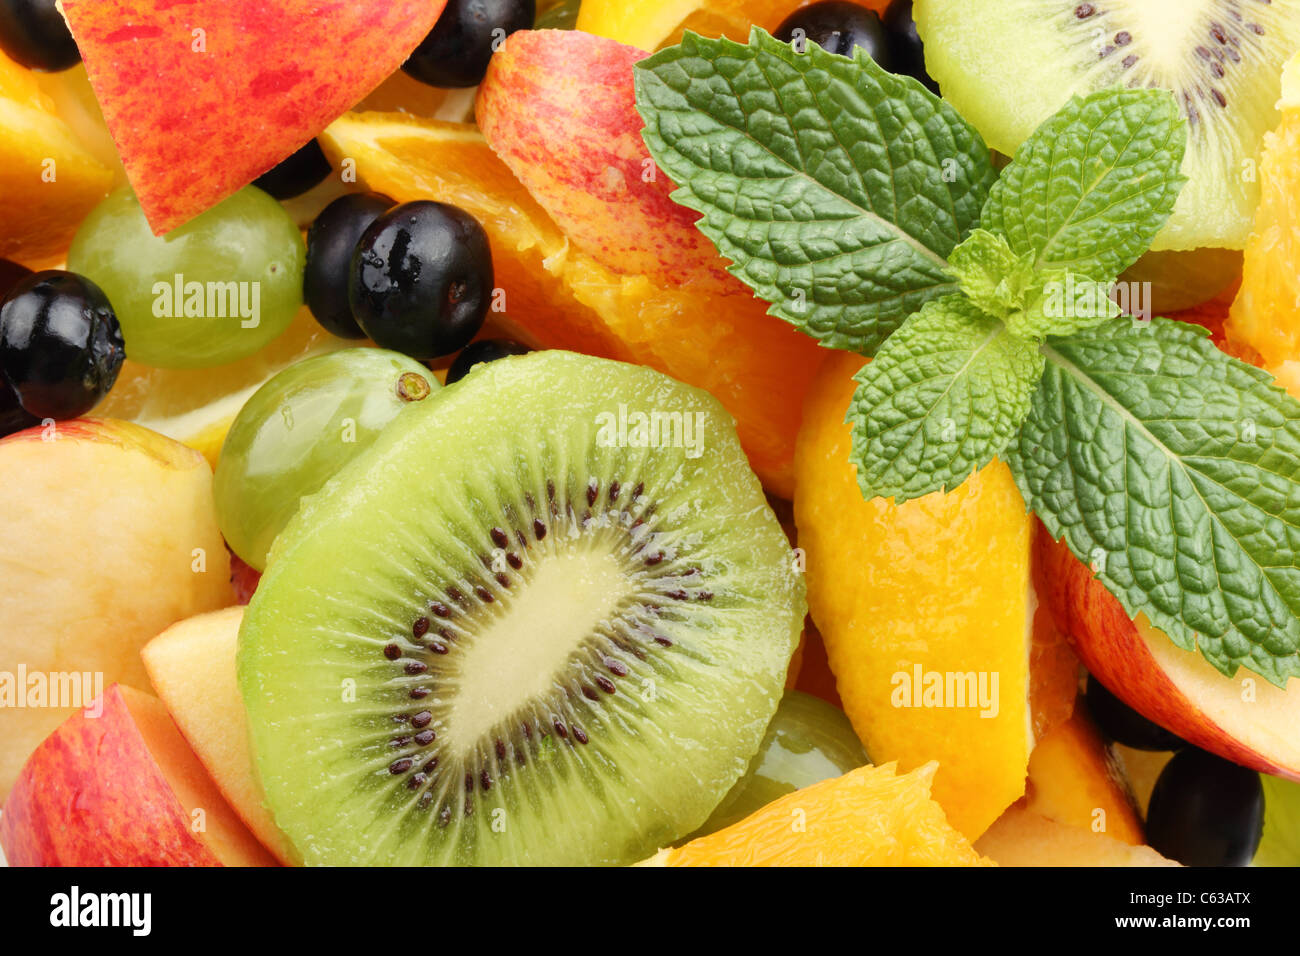 Fresh fruit salad with kiwi fruit,blueberries, oranges, grapes and mint leaves. Stock Photo